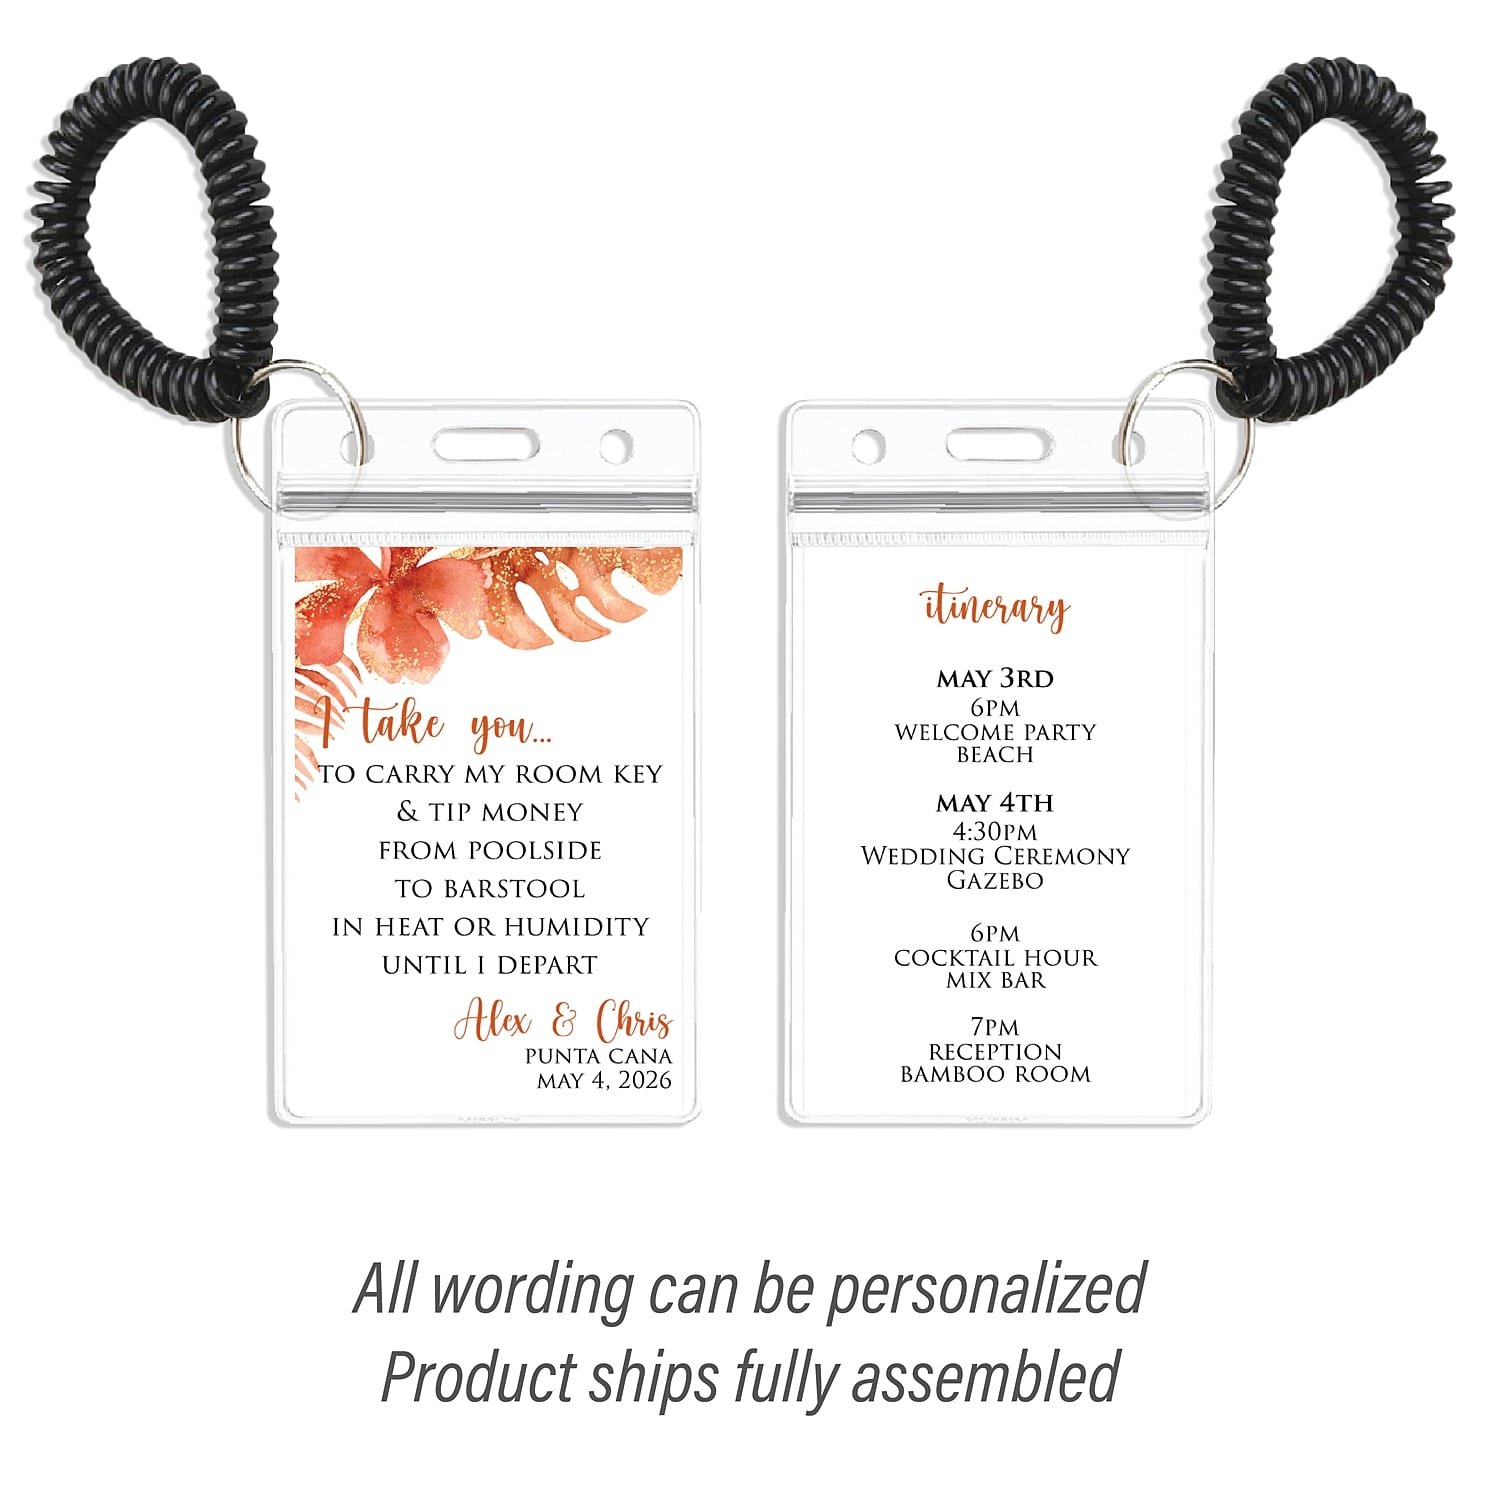 Personalized Destination Wedding Room Key Holder and Itinerary - Tropical Burnt Orange